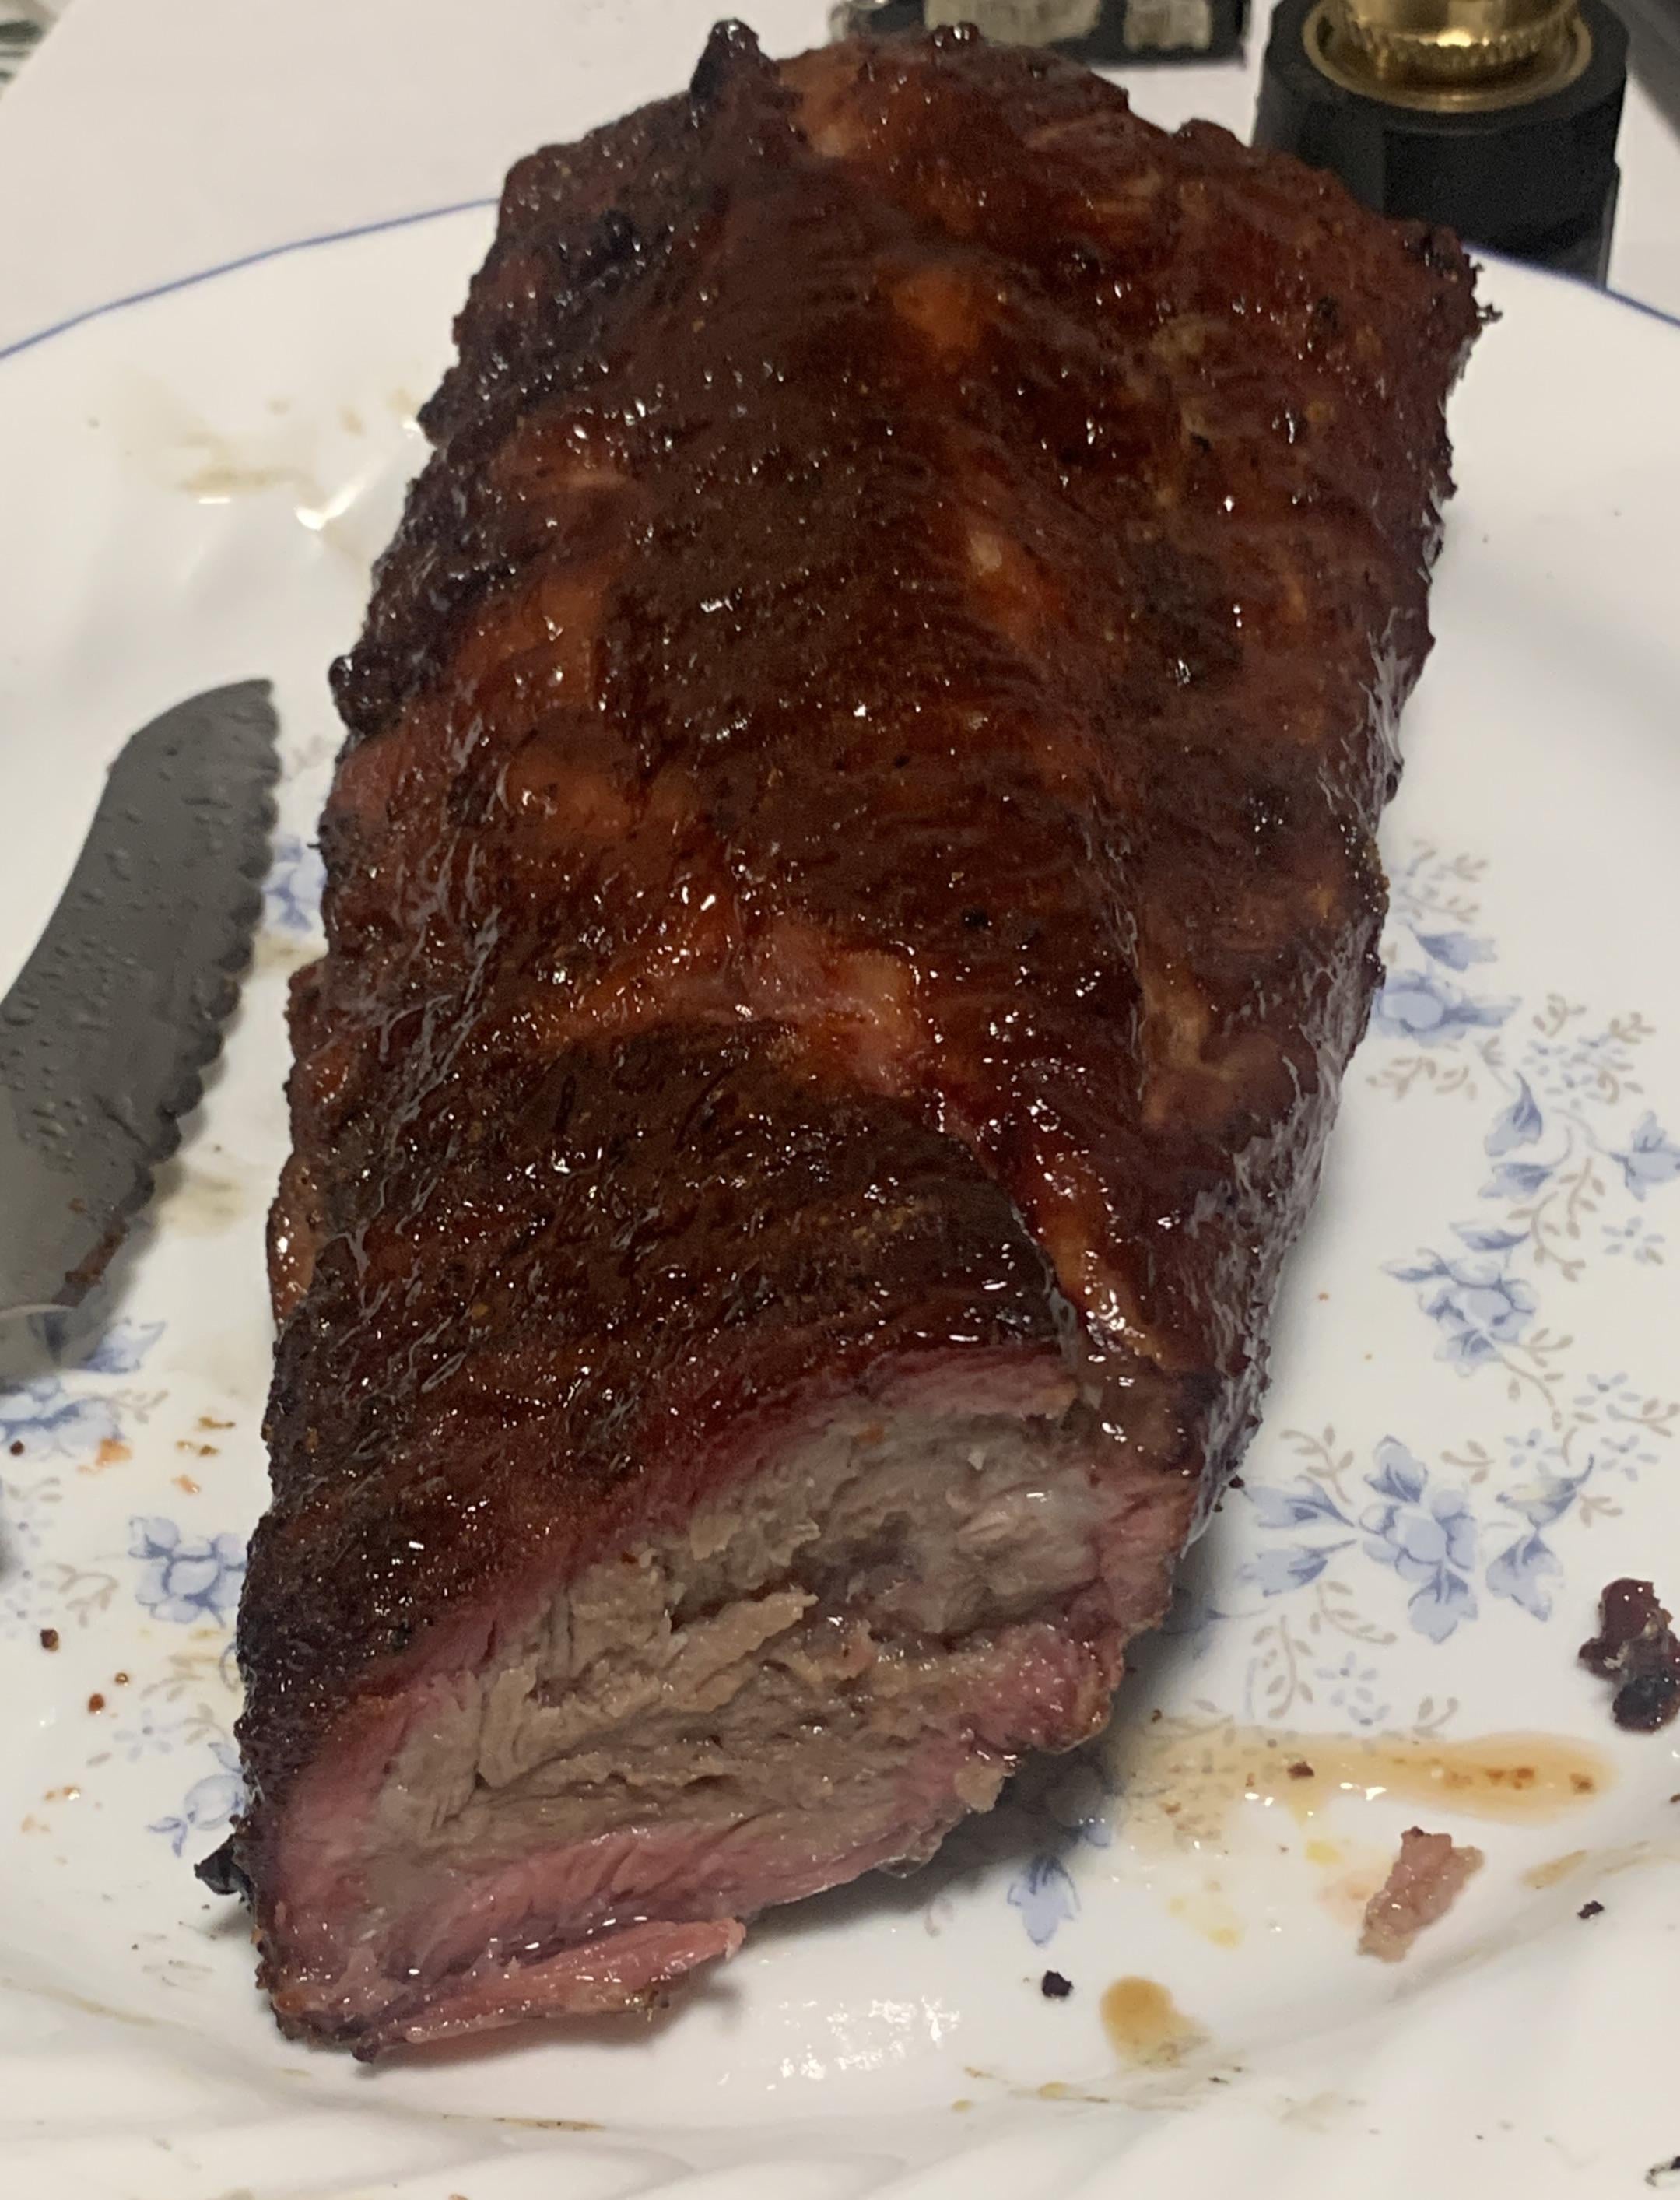 Plum wood smoked ribs - Dining and Cooking